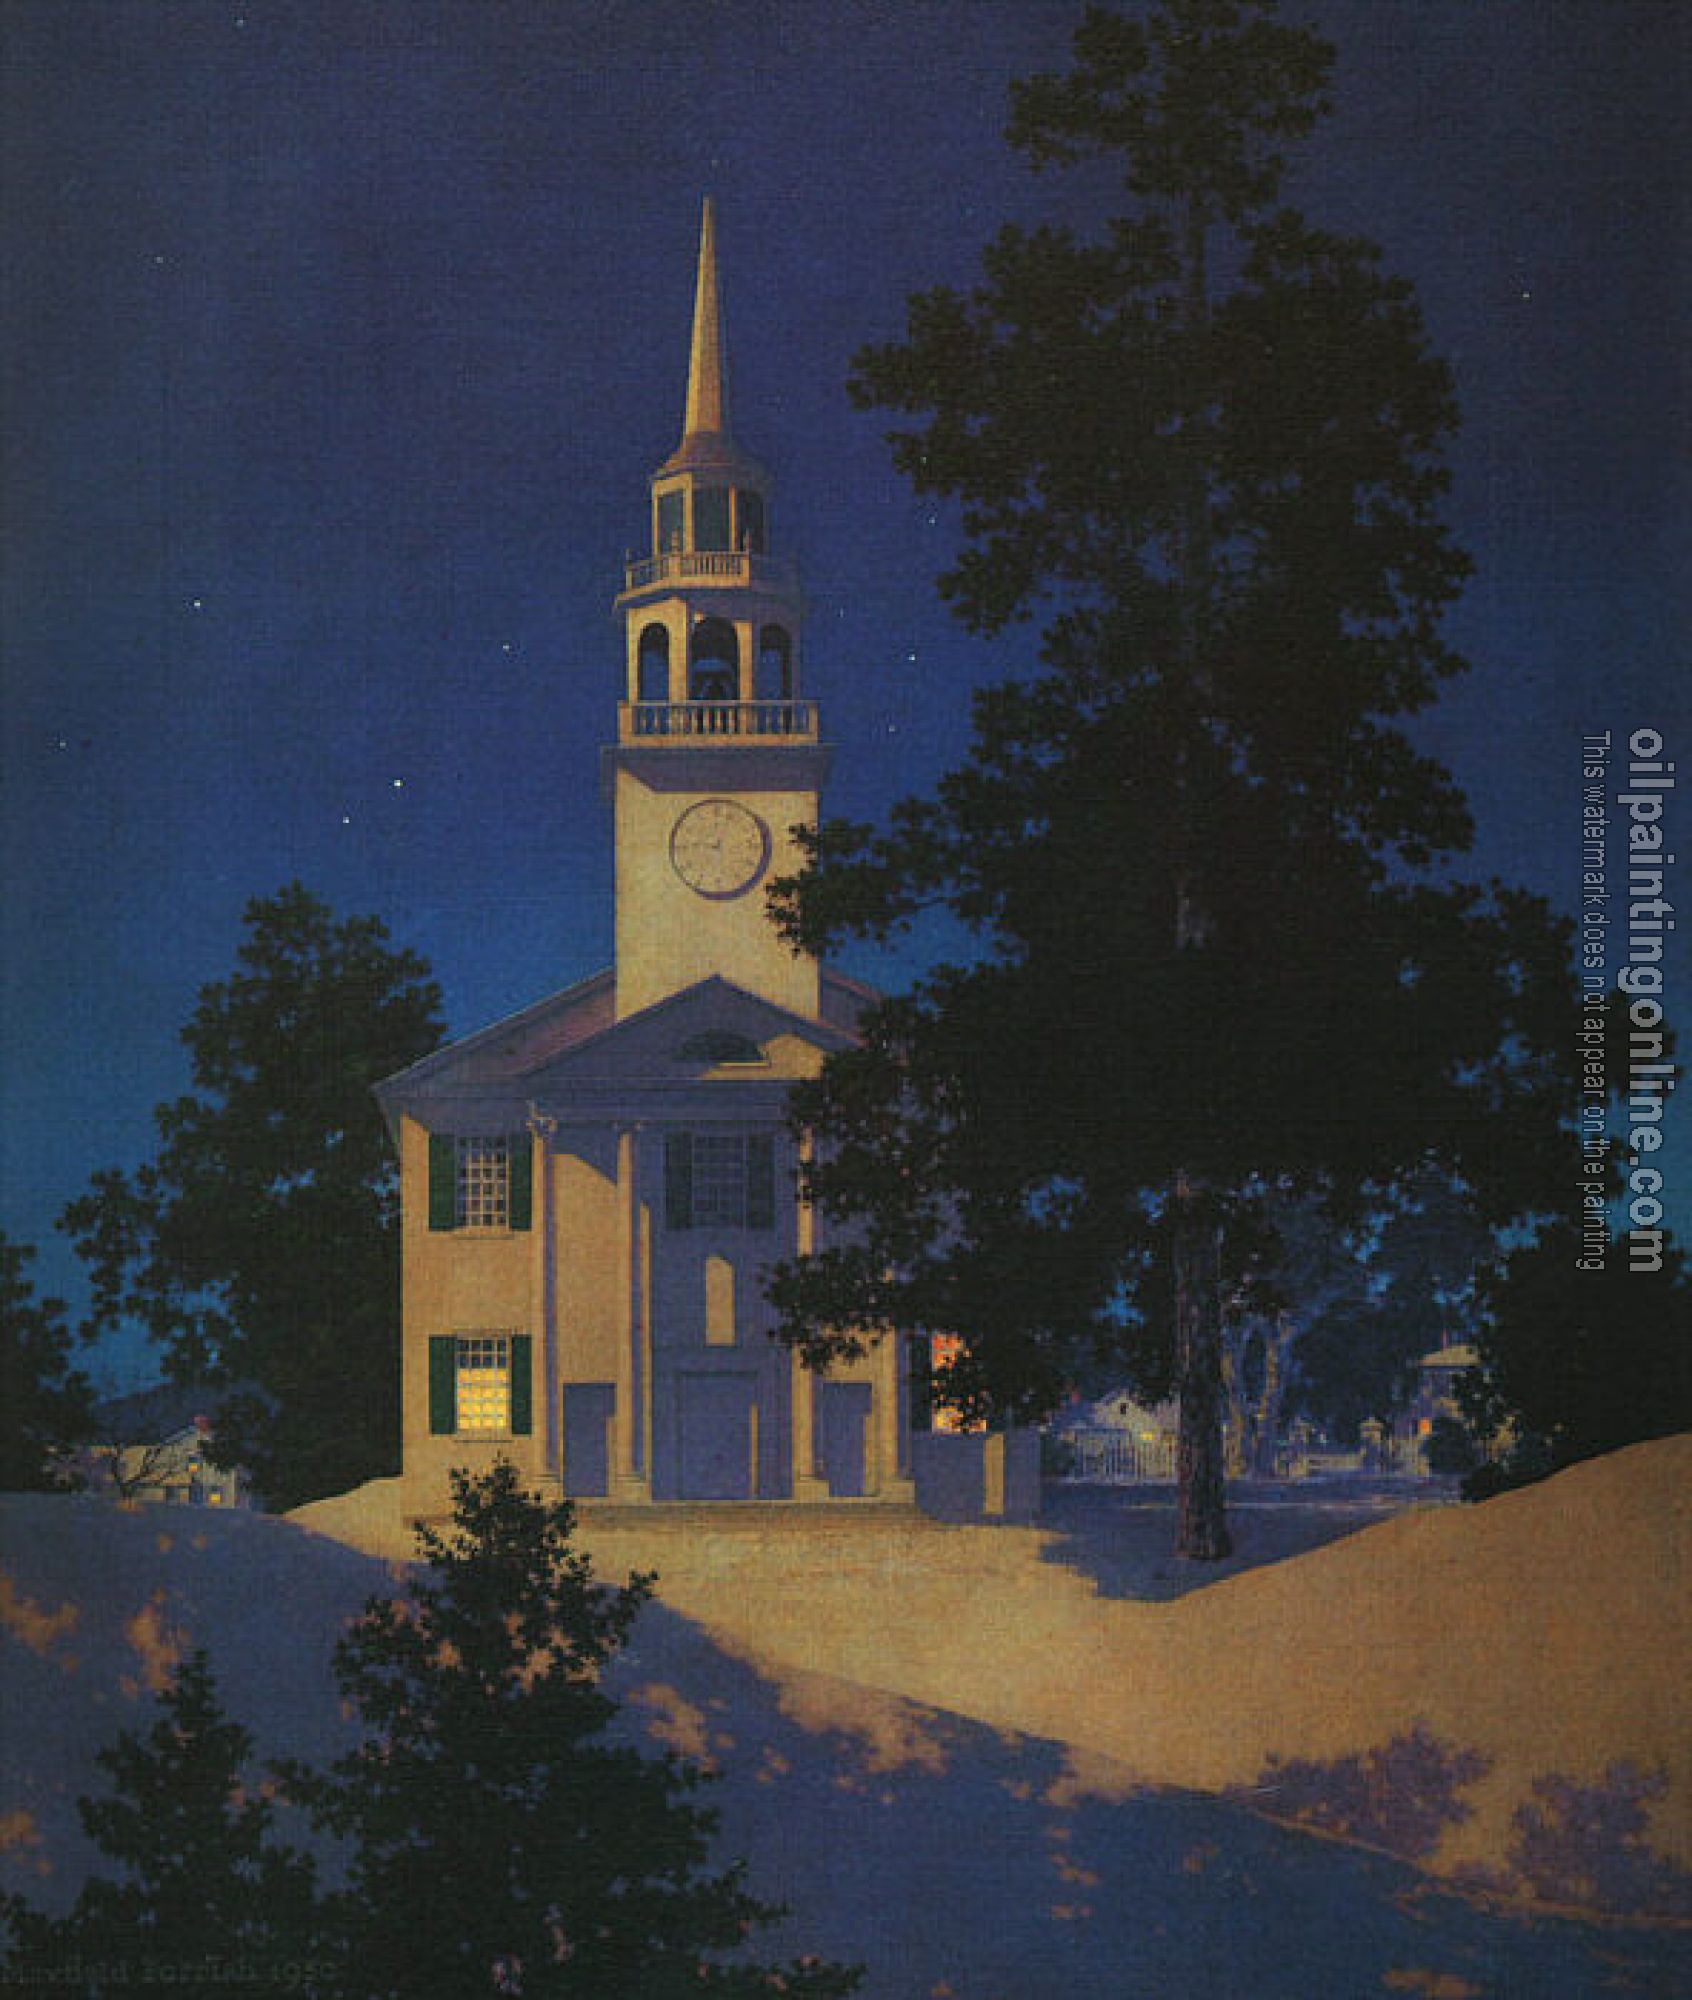 Parrish, Maxfield - Peaceful Night  Church at Norwich, Vermont